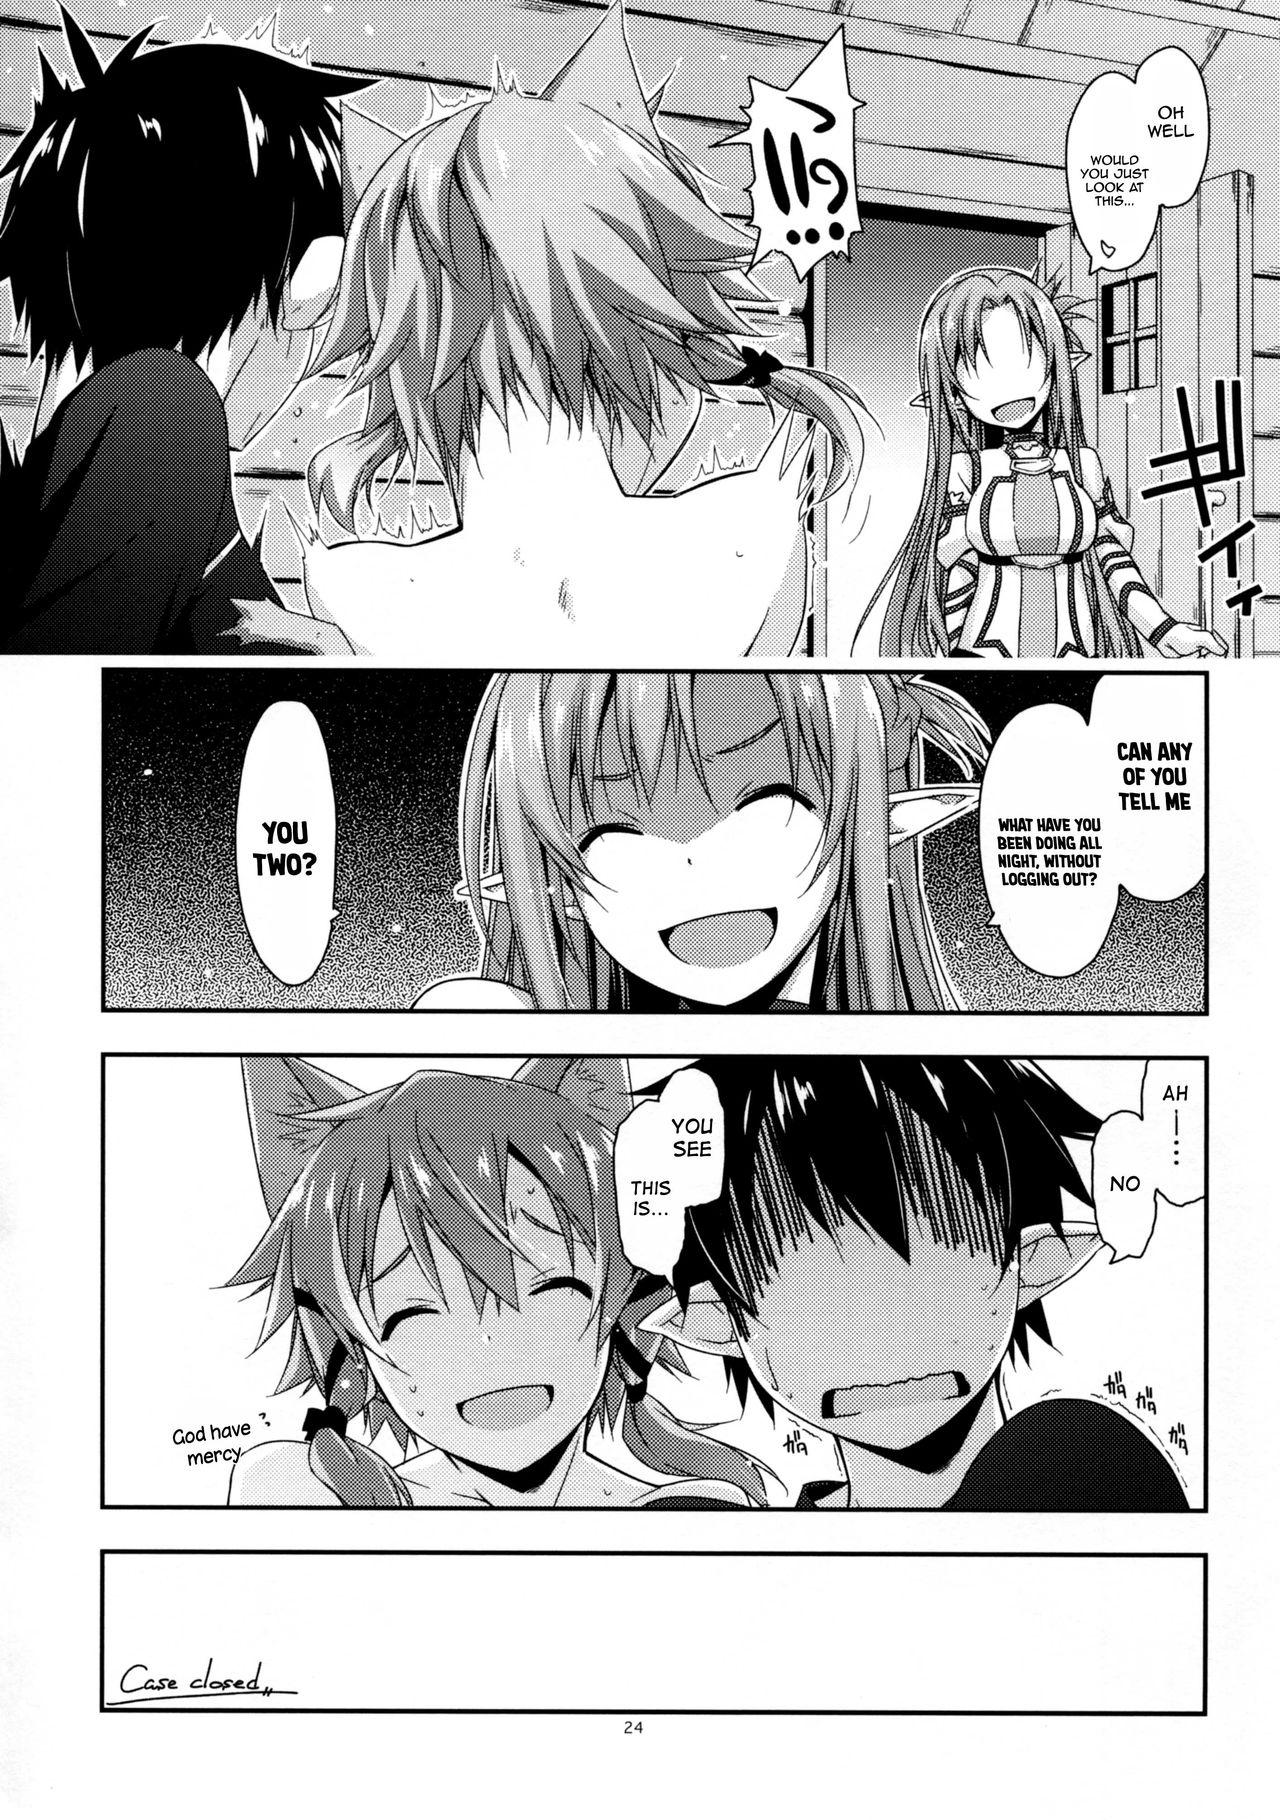 Gay Bareback Case closed. - Sword art online Mujer - Page 24